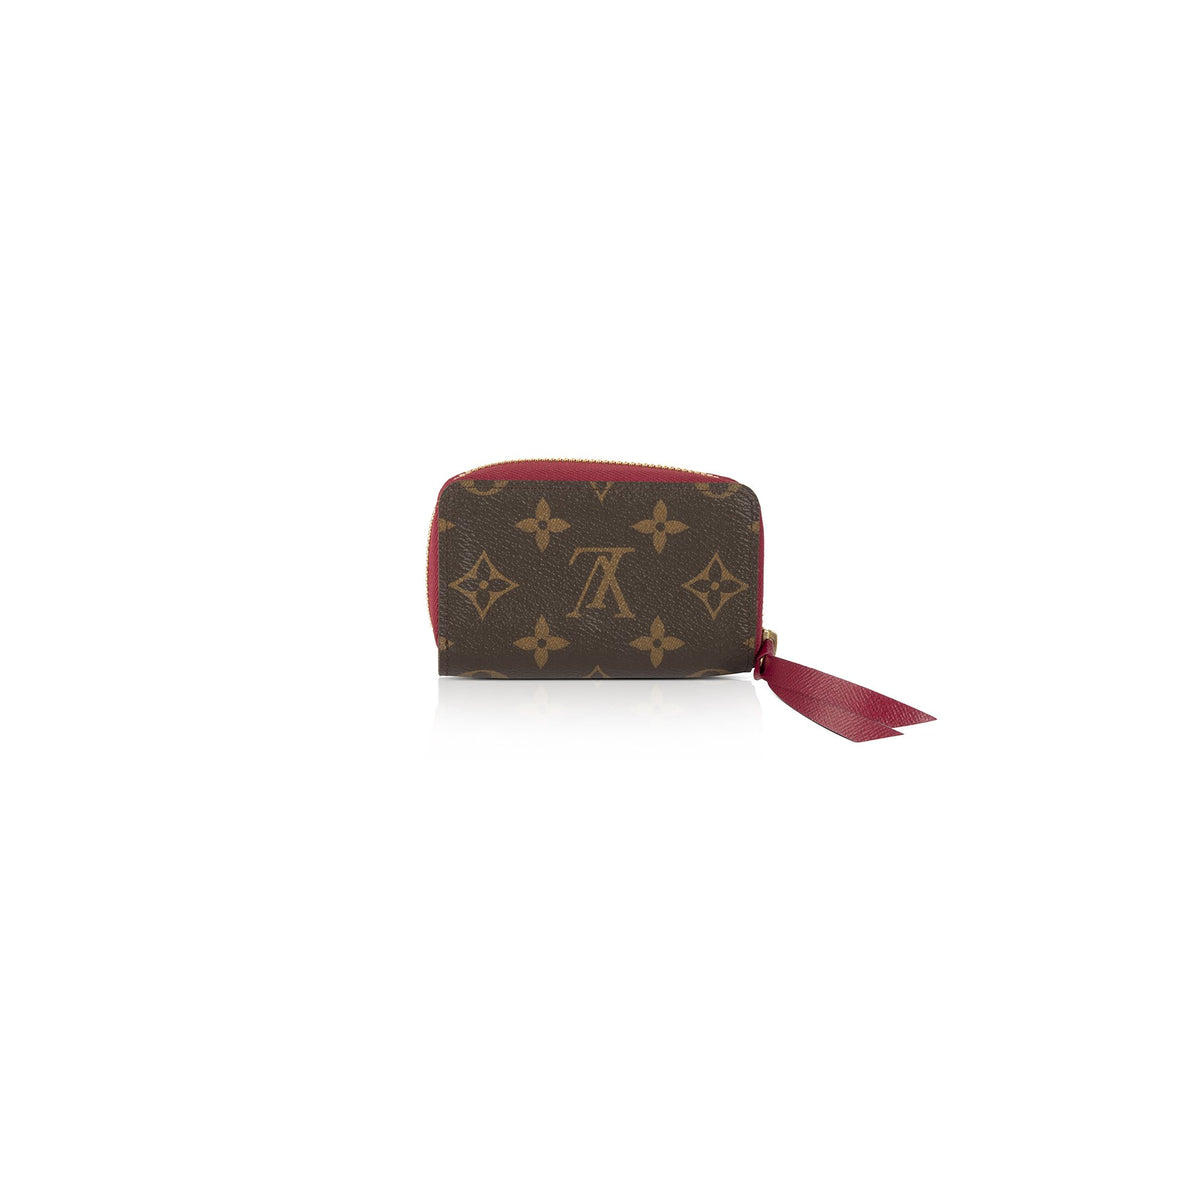 We carry a range of top-quality products available at reasonable prices. Louis  Vuitton Monogram Zippy Multicartes w/ Box Louis Vuitton